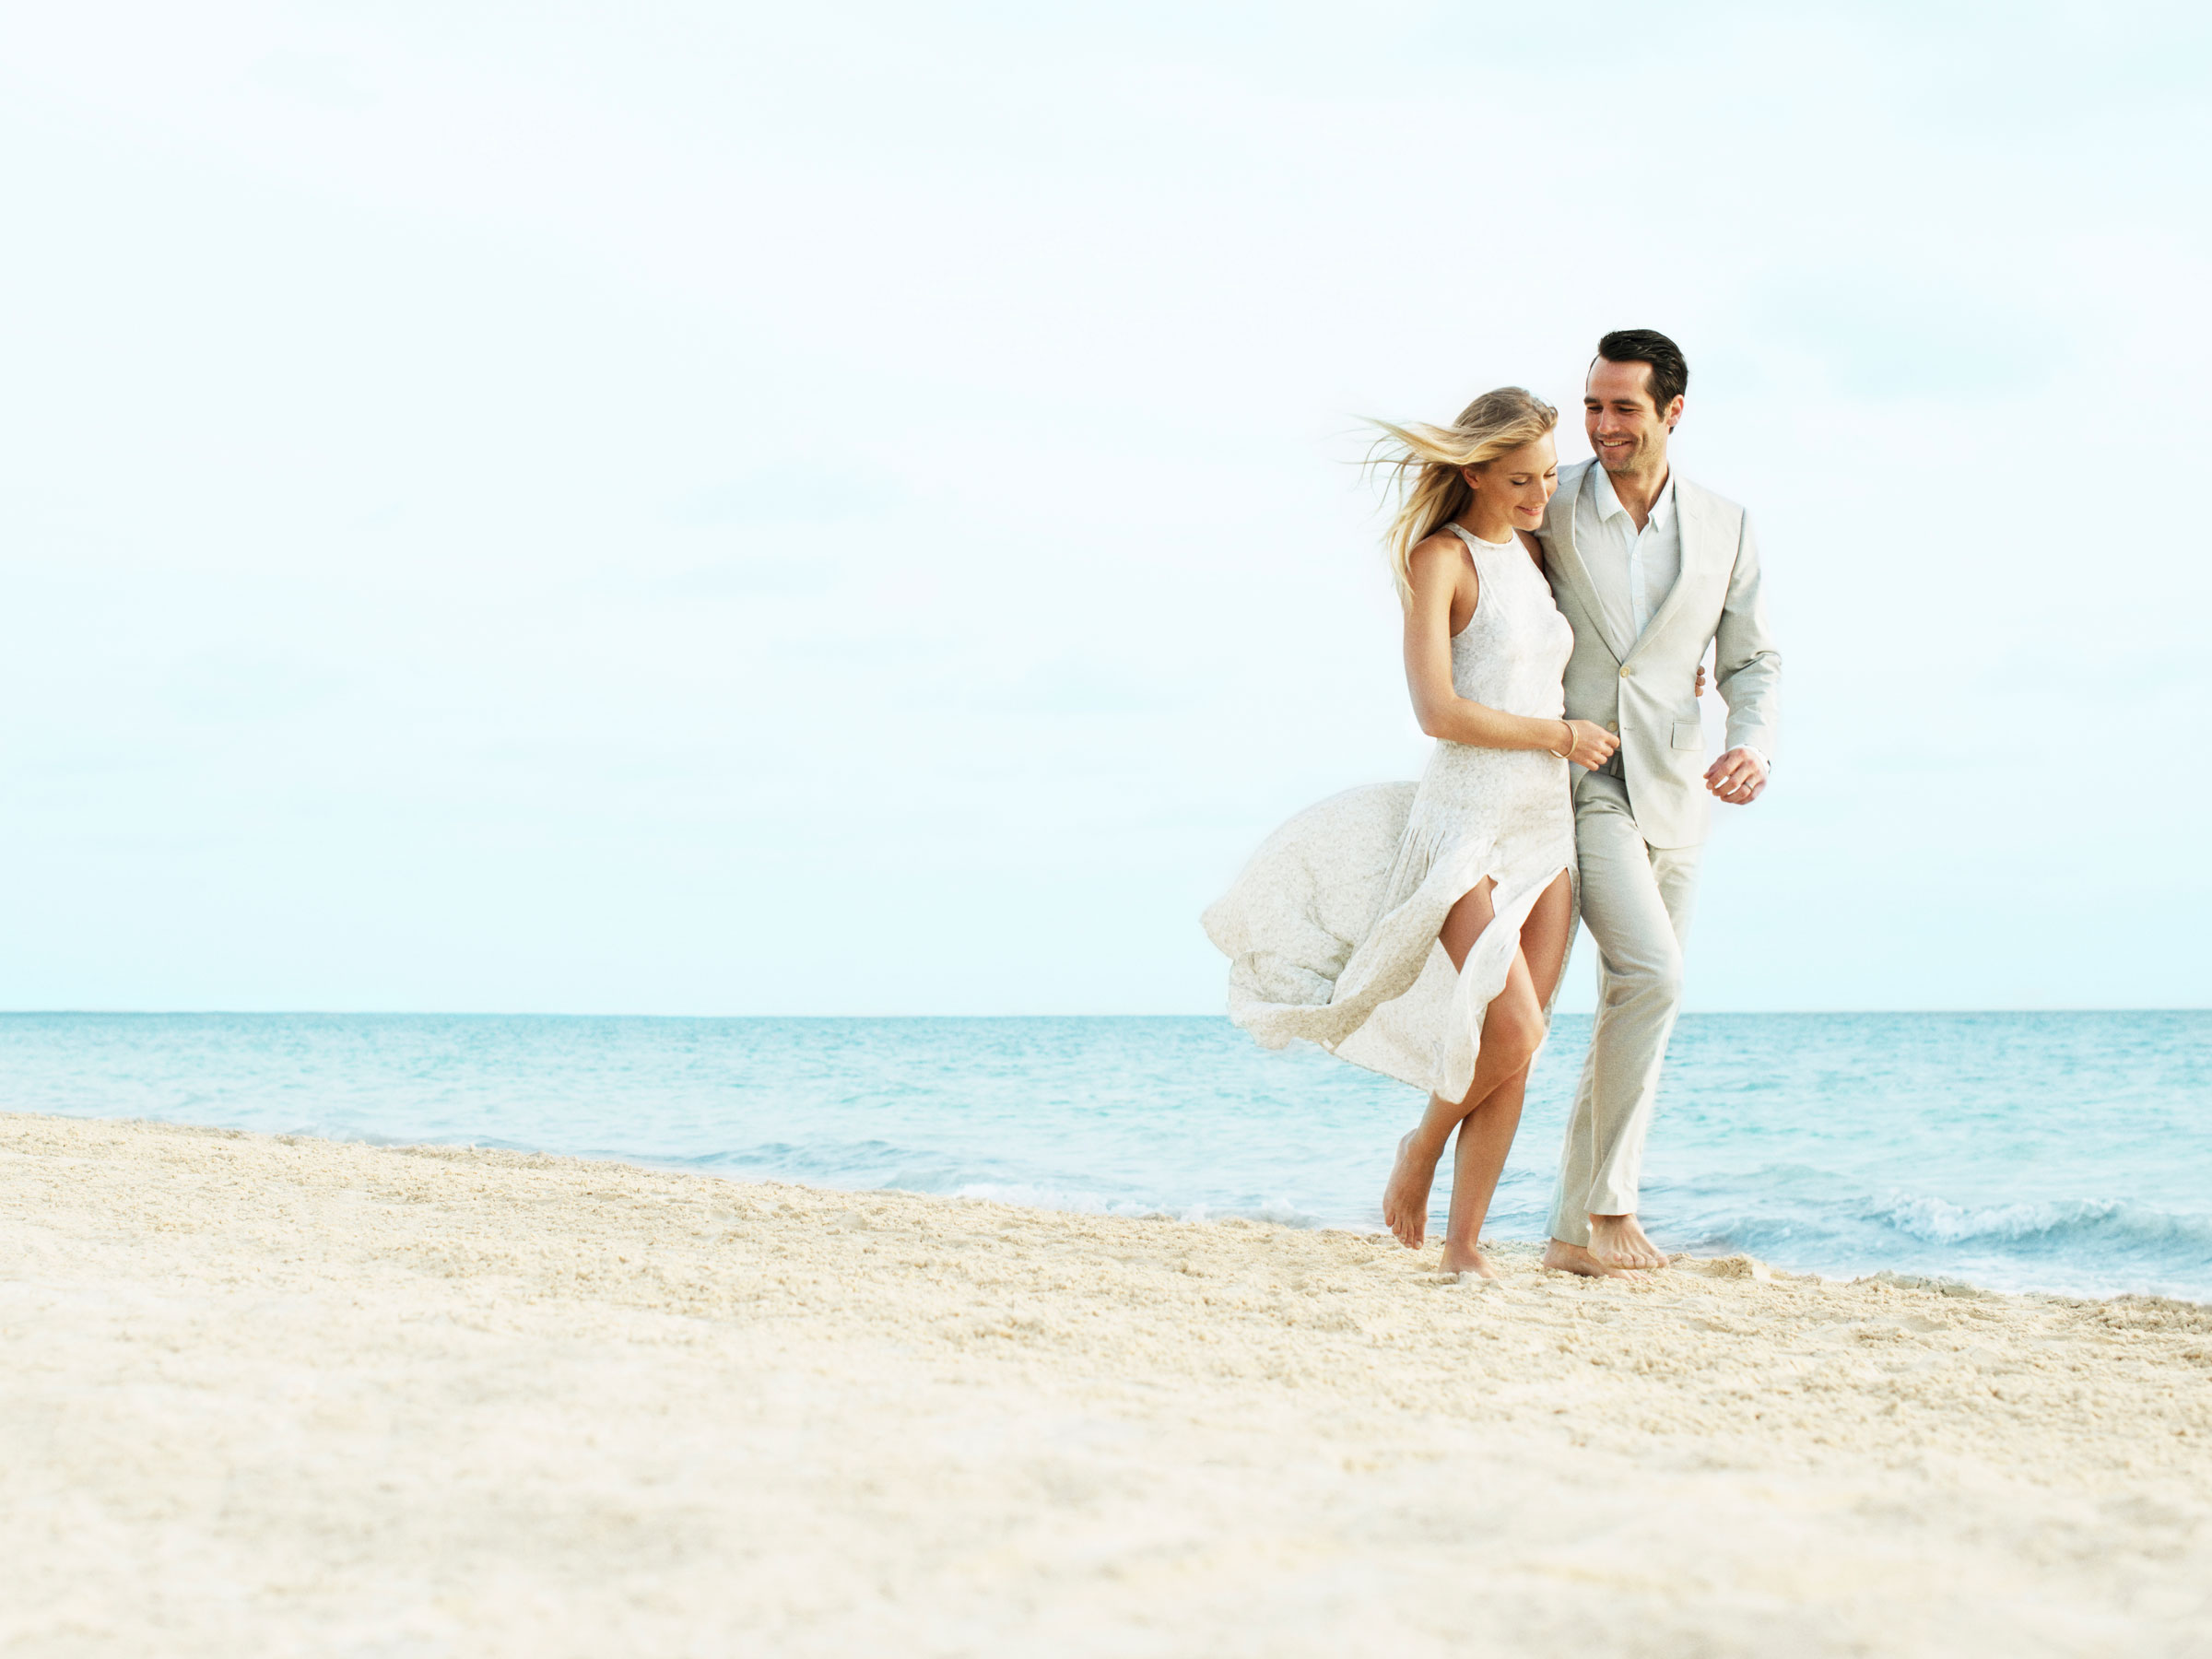 The best package deals for couples in Cancun